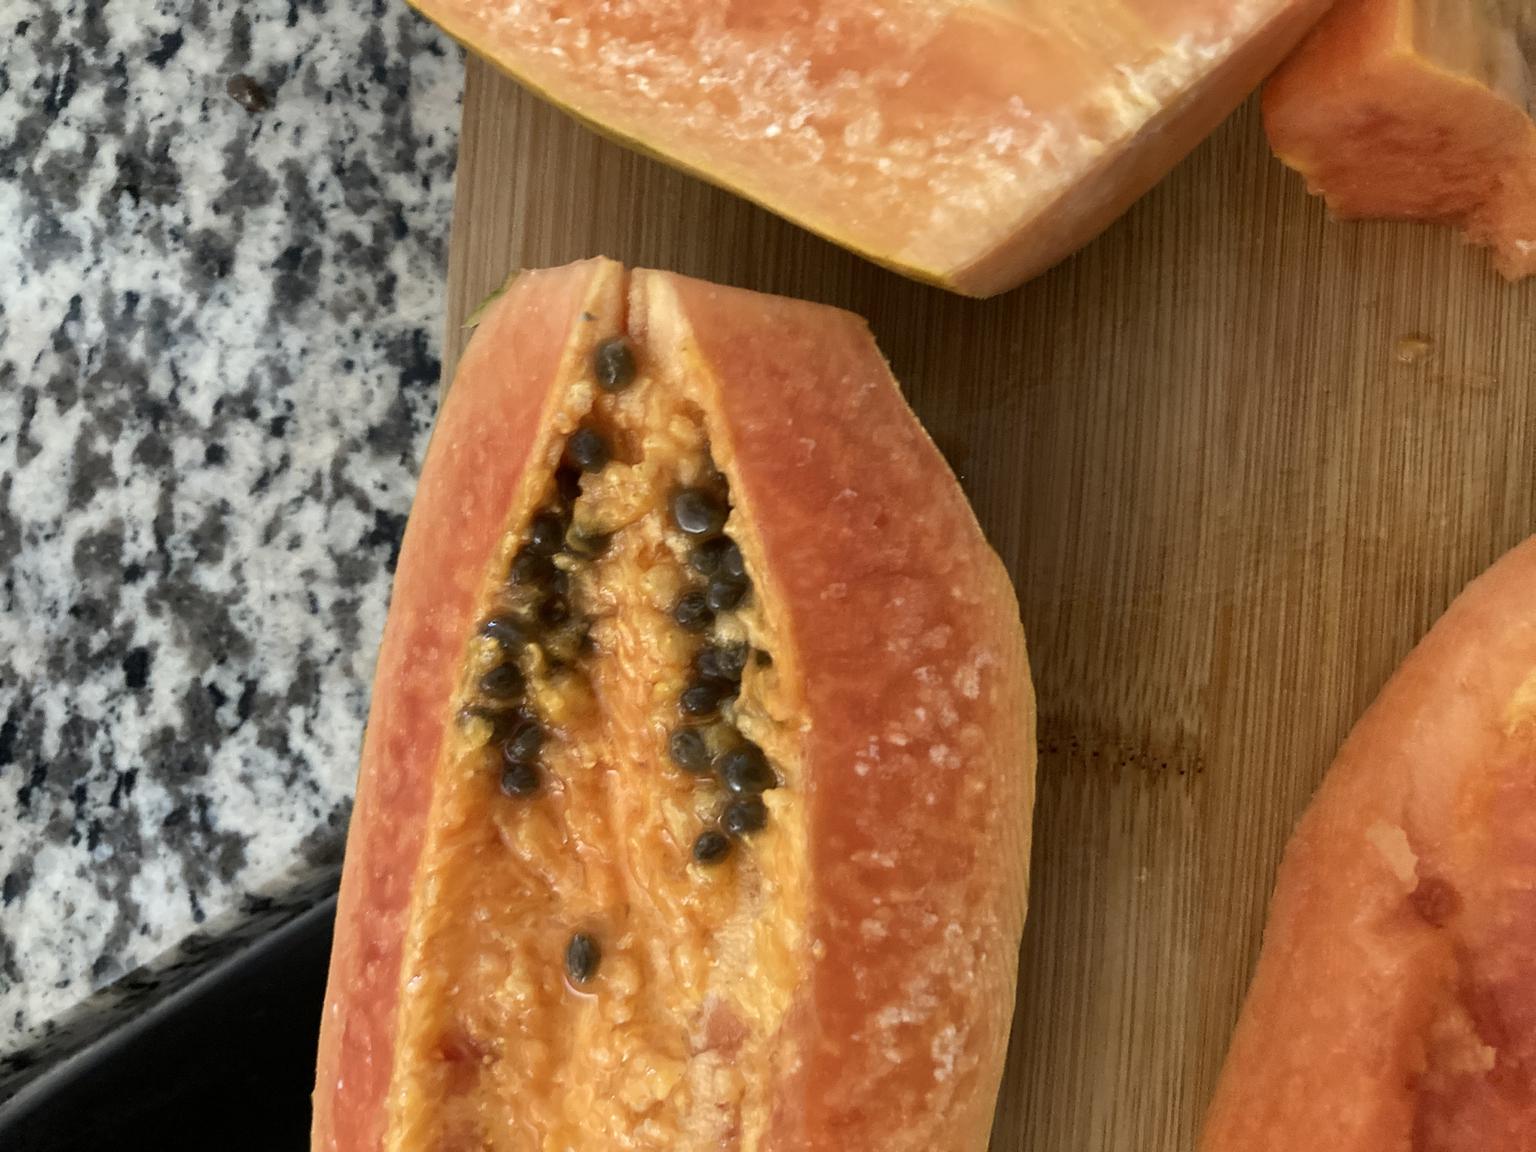 How To Eat Papaya, For The Uninitiated